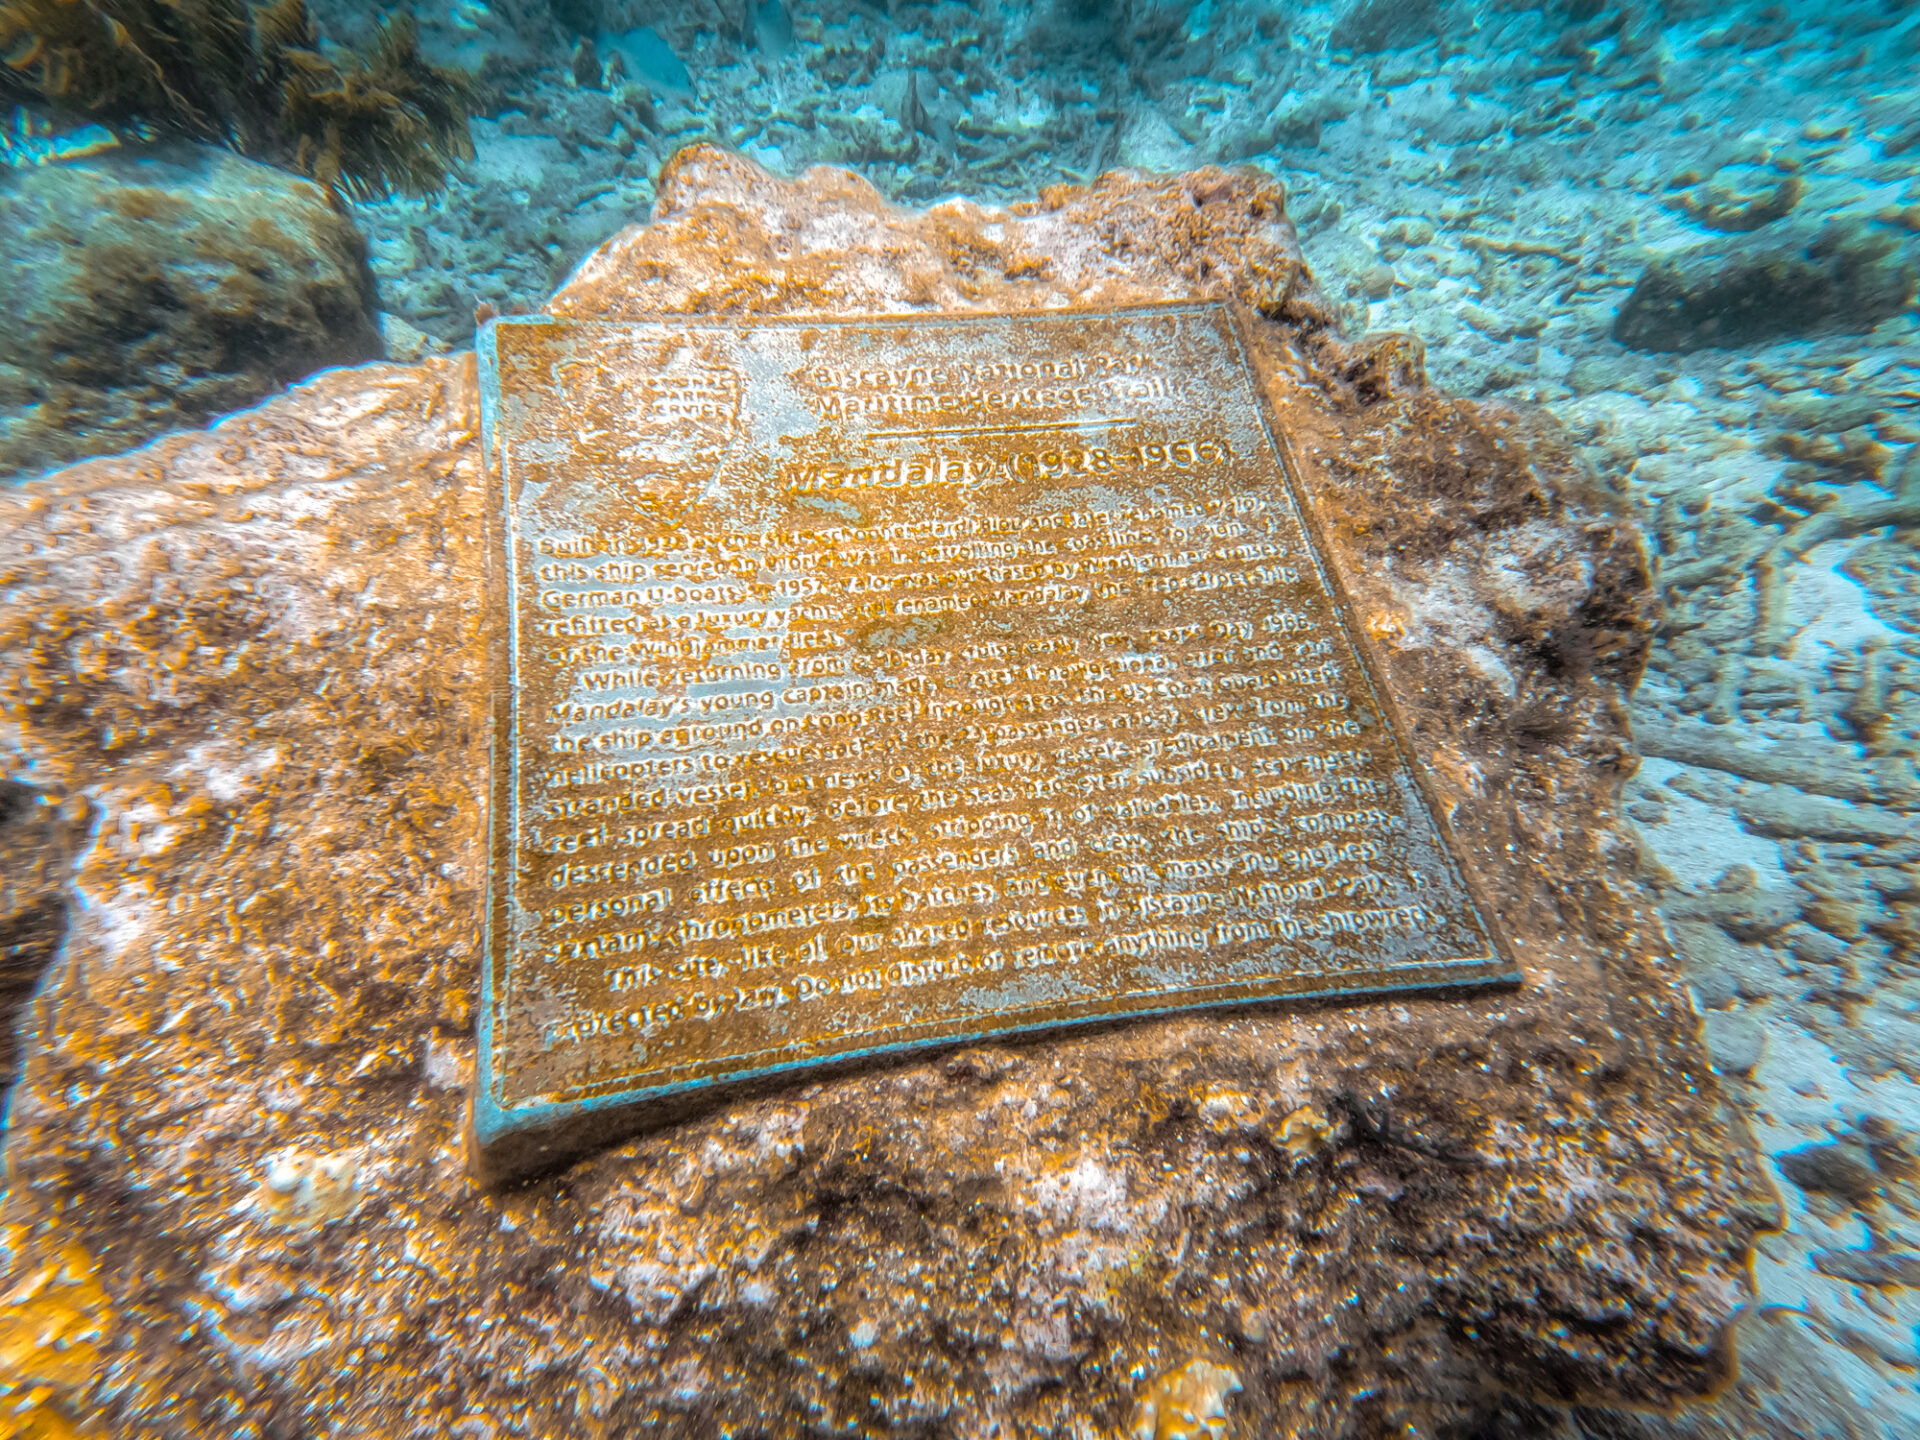 At the bottom of the ocean in Biscayne National Park